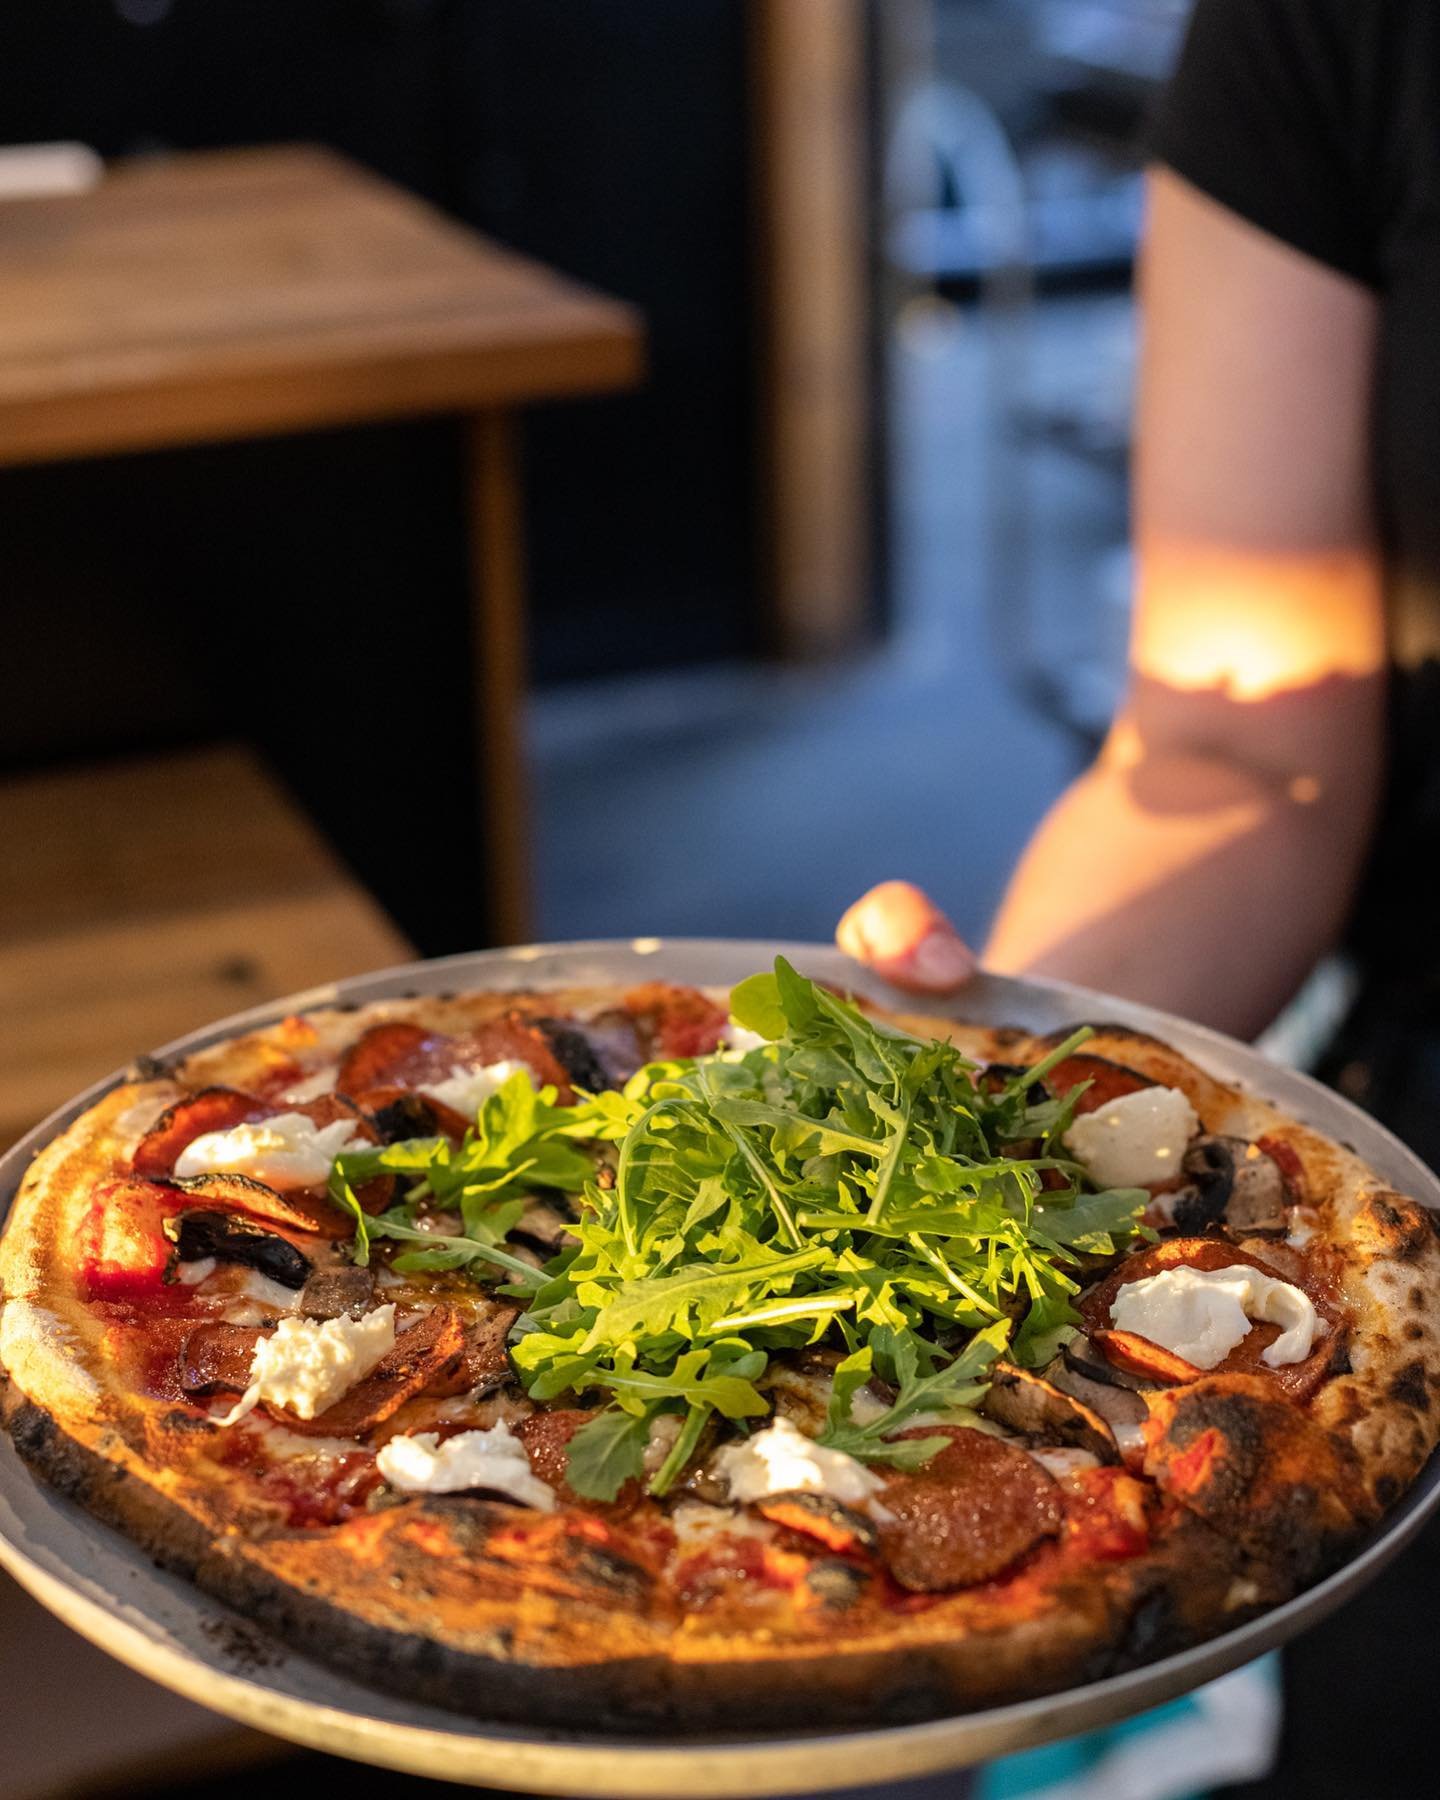 🌼 Spice up Mother&rsquo;s Day with a slice of happiness at Mitcham Social! 

🍕 Treat your Mum to our sizzling wood-fired pizza and make her day as awesome as she is. 

Let&rsquo;s toast to the ultimate pizza party for the ultimate Mums! 🎉

Upgrade